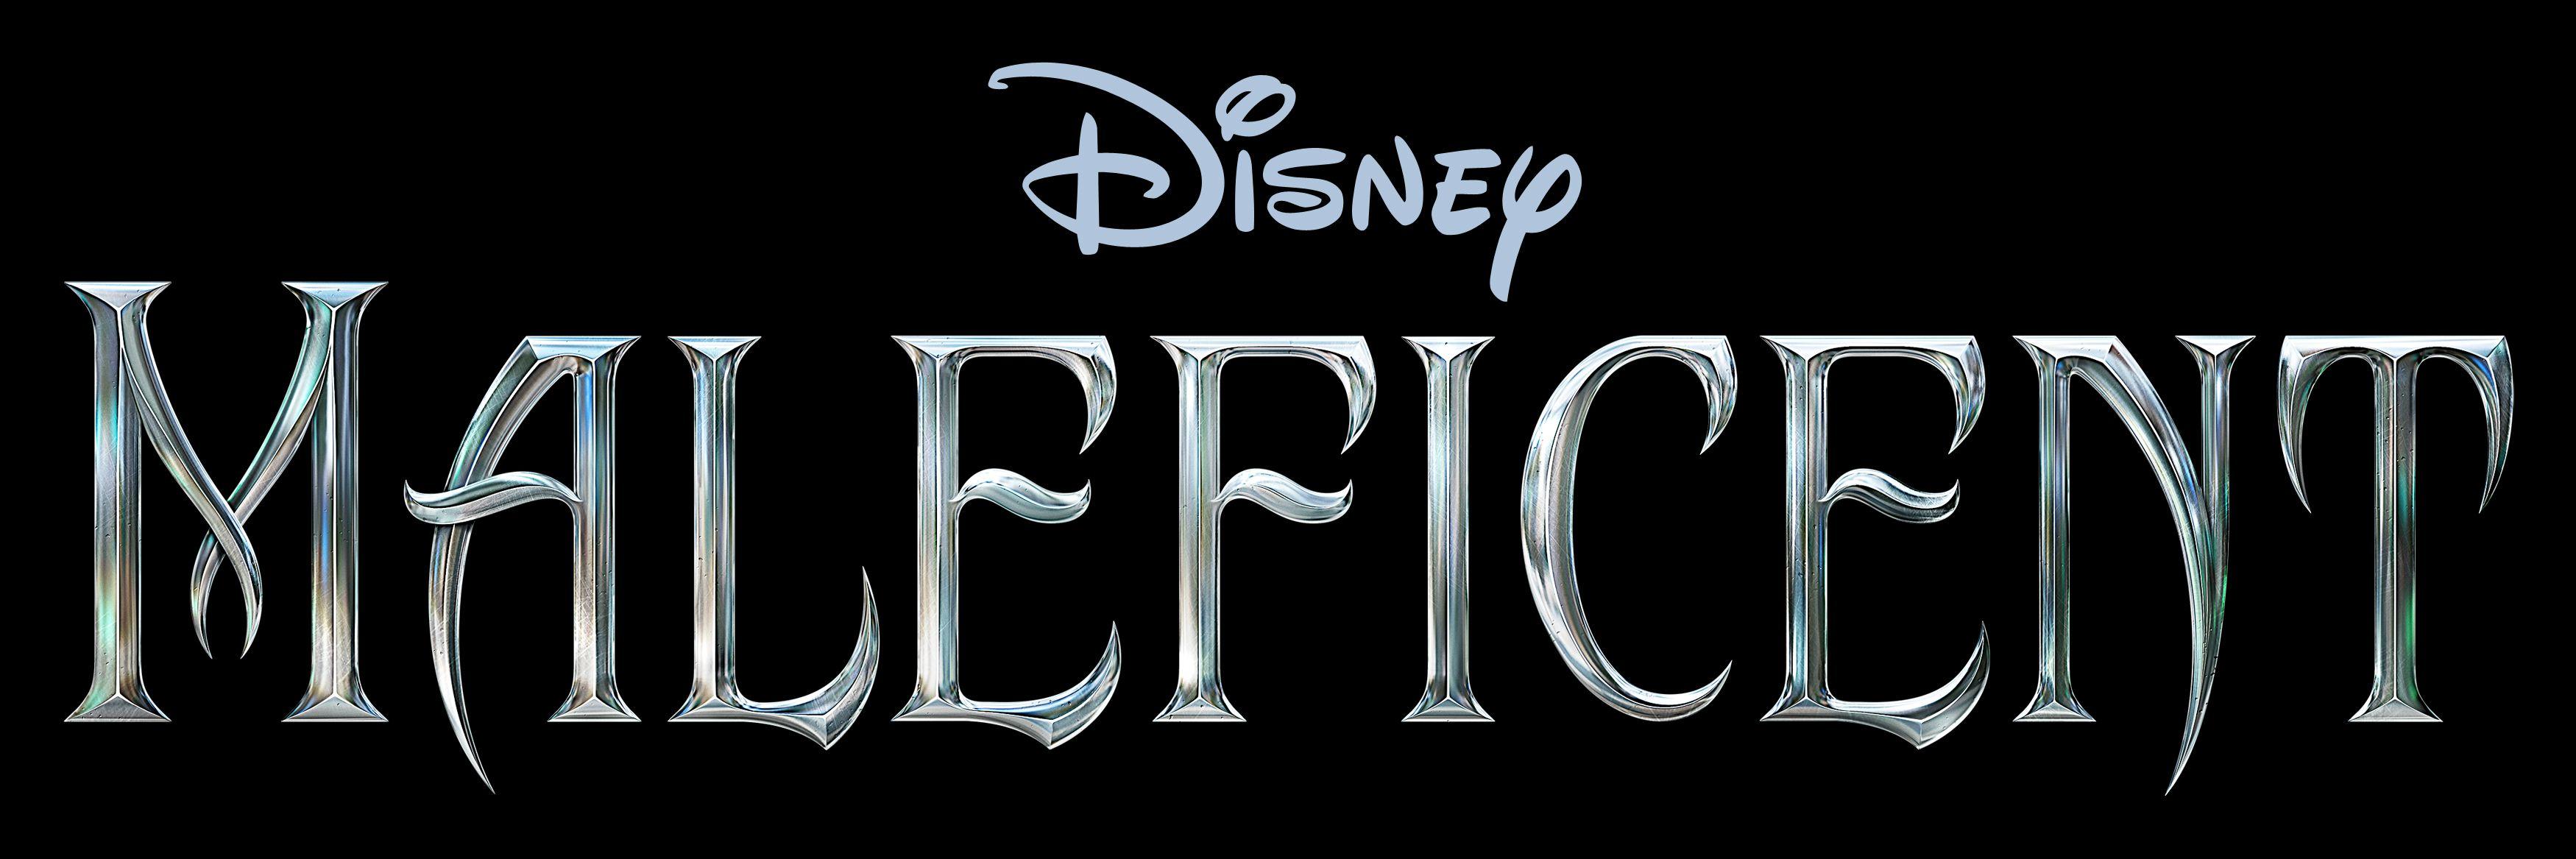 Disney Movie Title Logo - TOMORROWLAND, MALEFICENT, MUPPETS MOST WANTED, and SAVING MR. BANKS ...